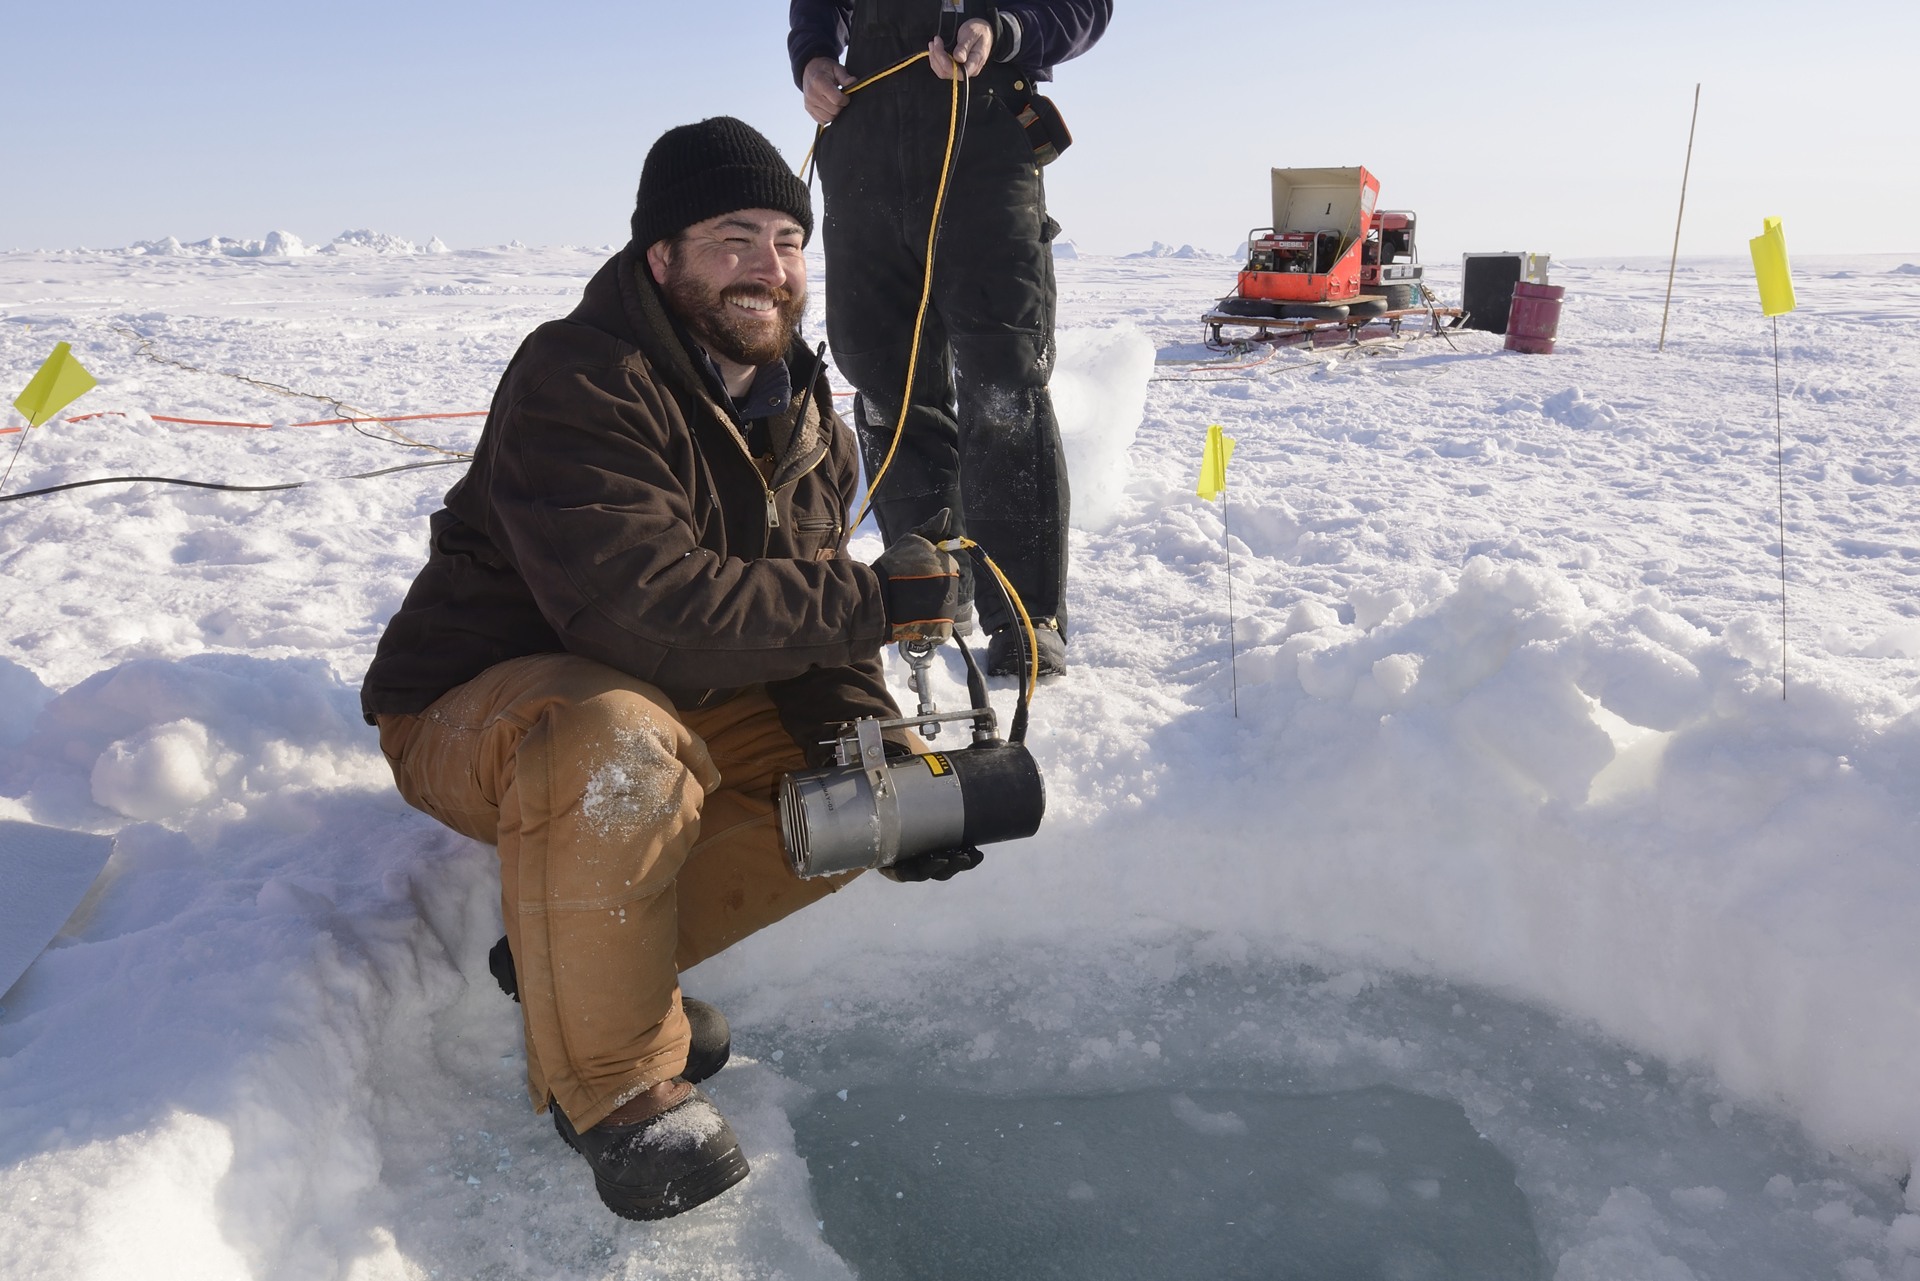 This sound projector provides a more consistent and controlled sound to test the icepick geobuoys.
Photo by Janice Lang, DRDC